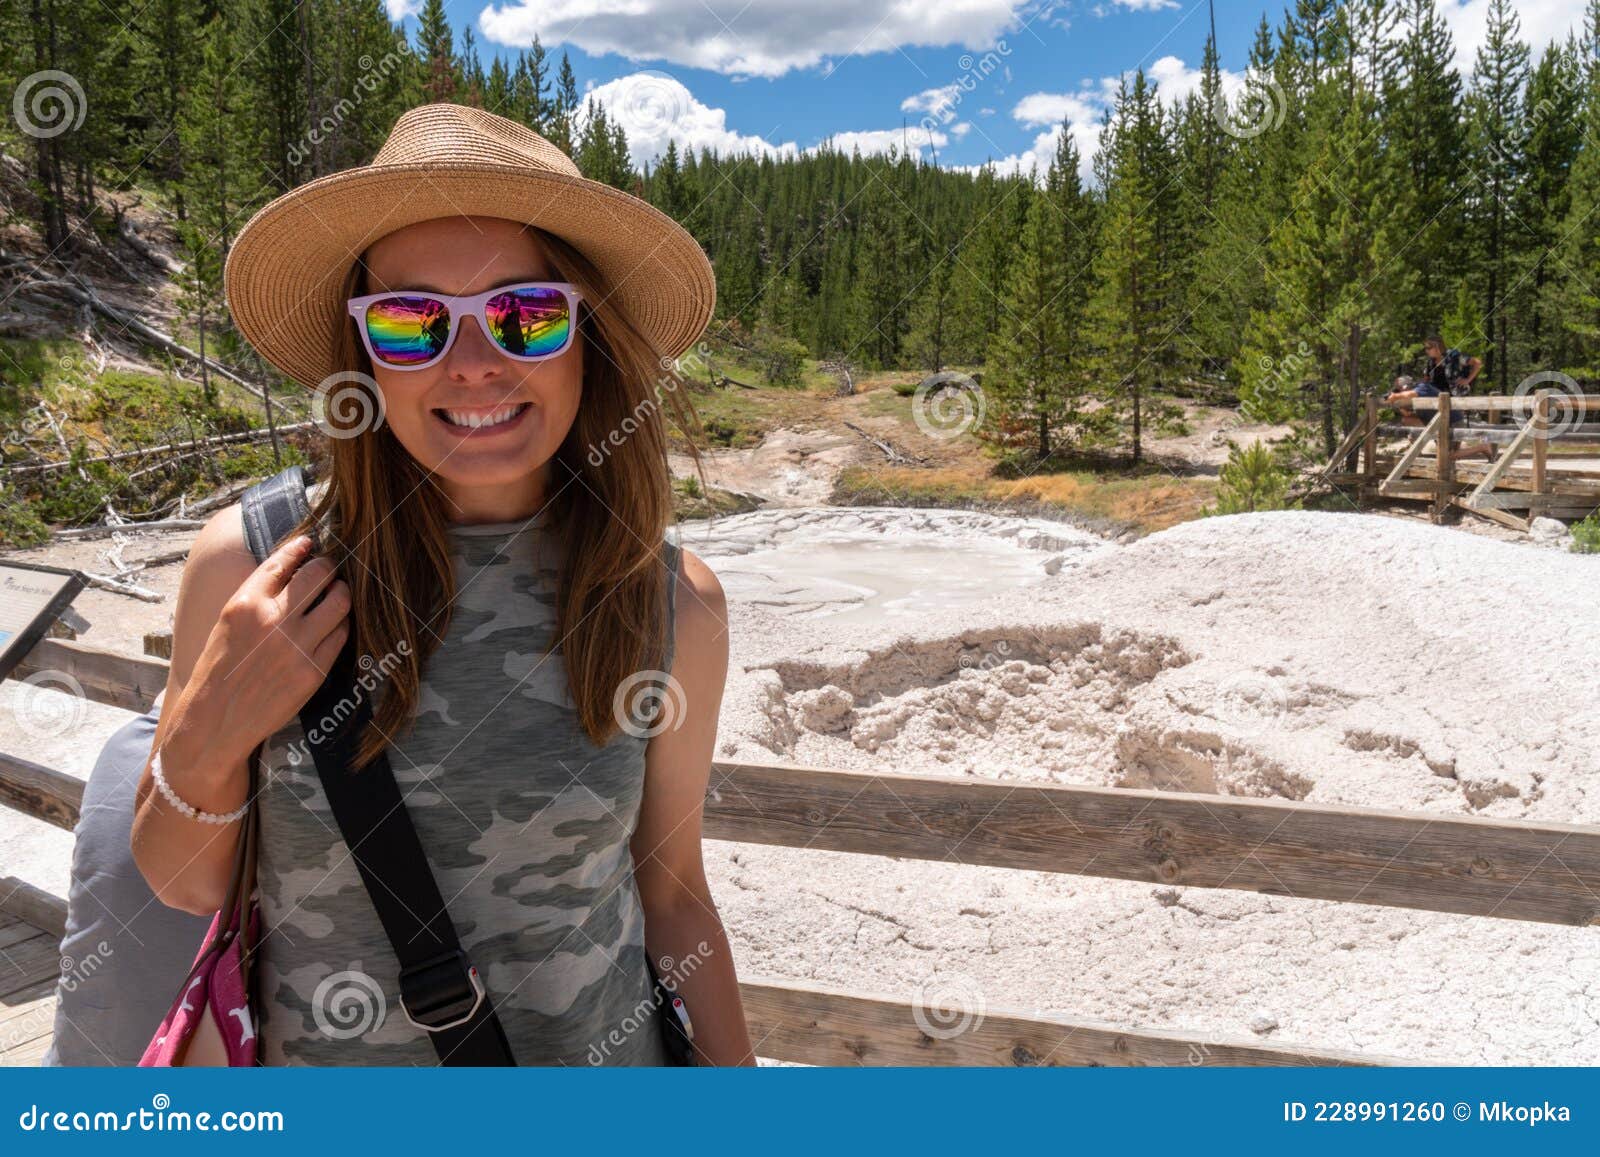 young woman wearing a camoflauge outfit and sun hat poses at the mud pots at artist paint pots in yellowstone